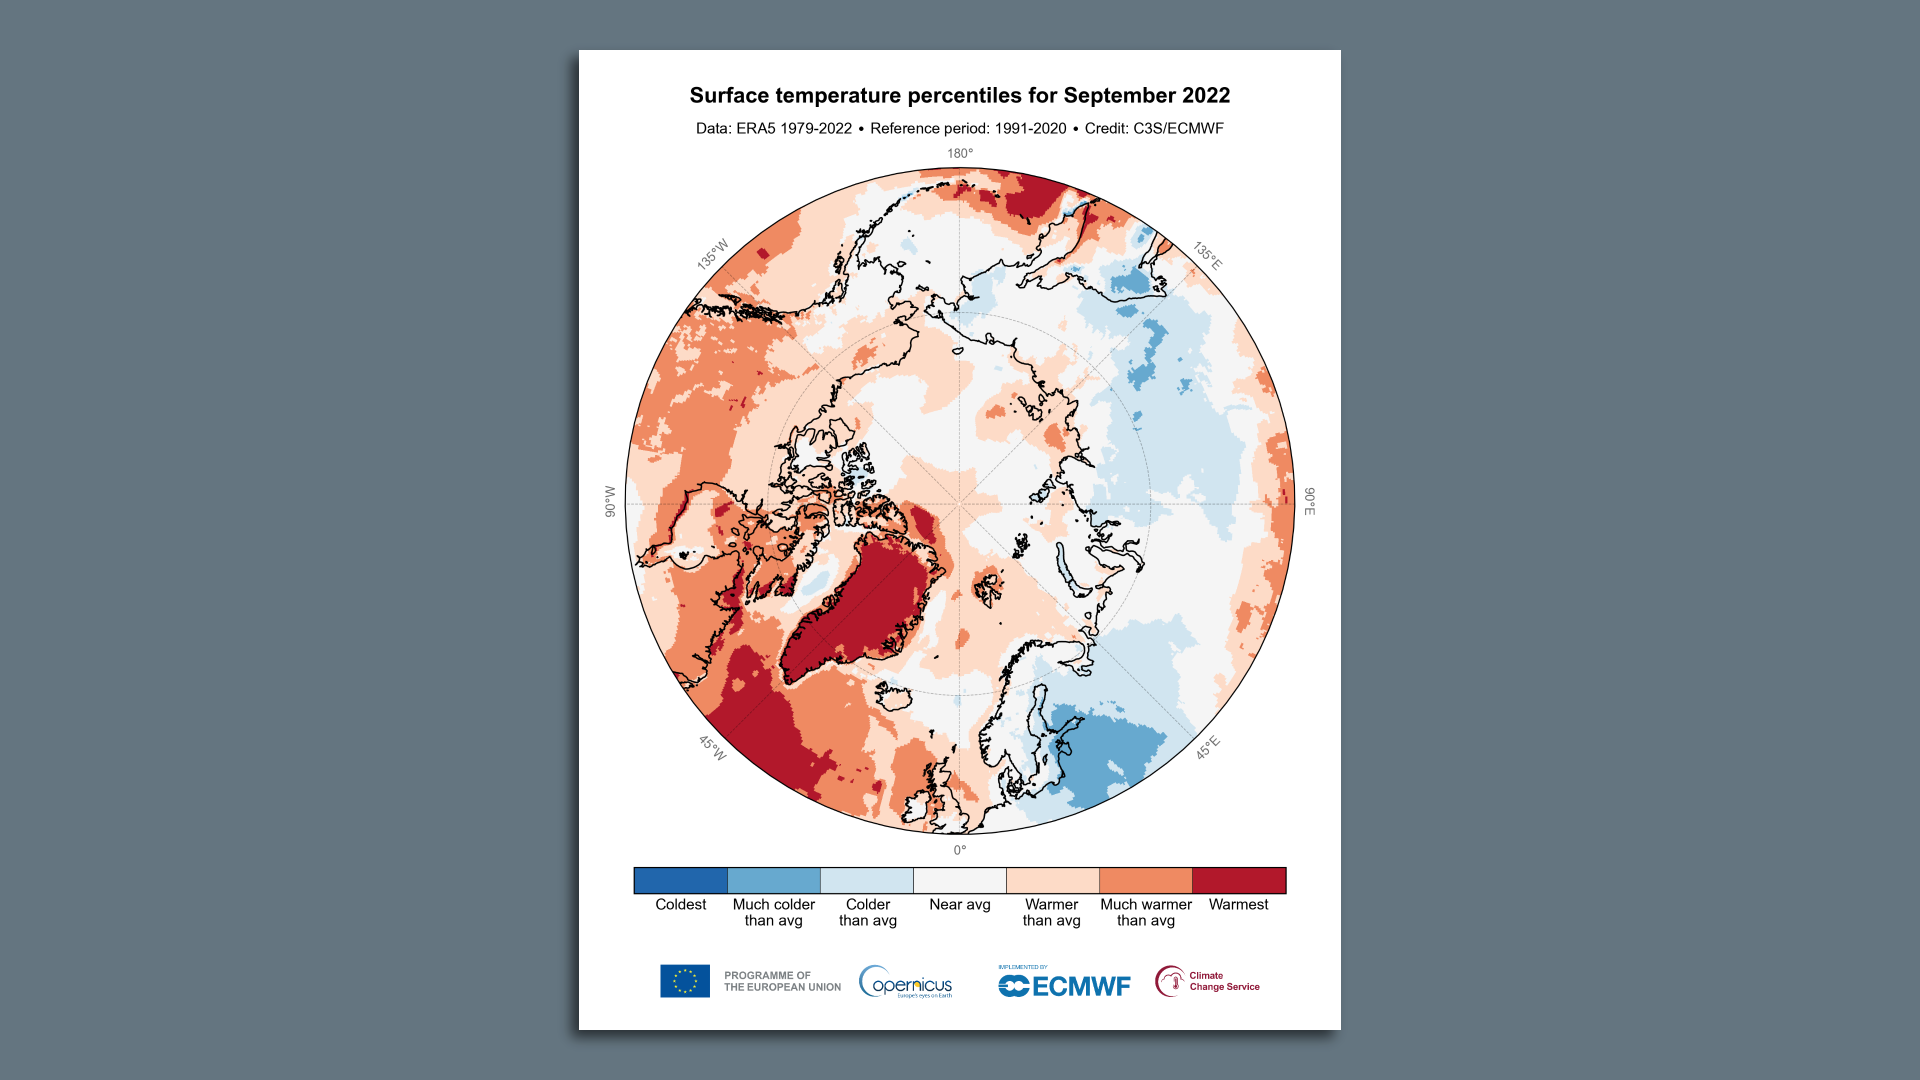 Map showing surface temperature percentiles in the Arctic during September 2022.